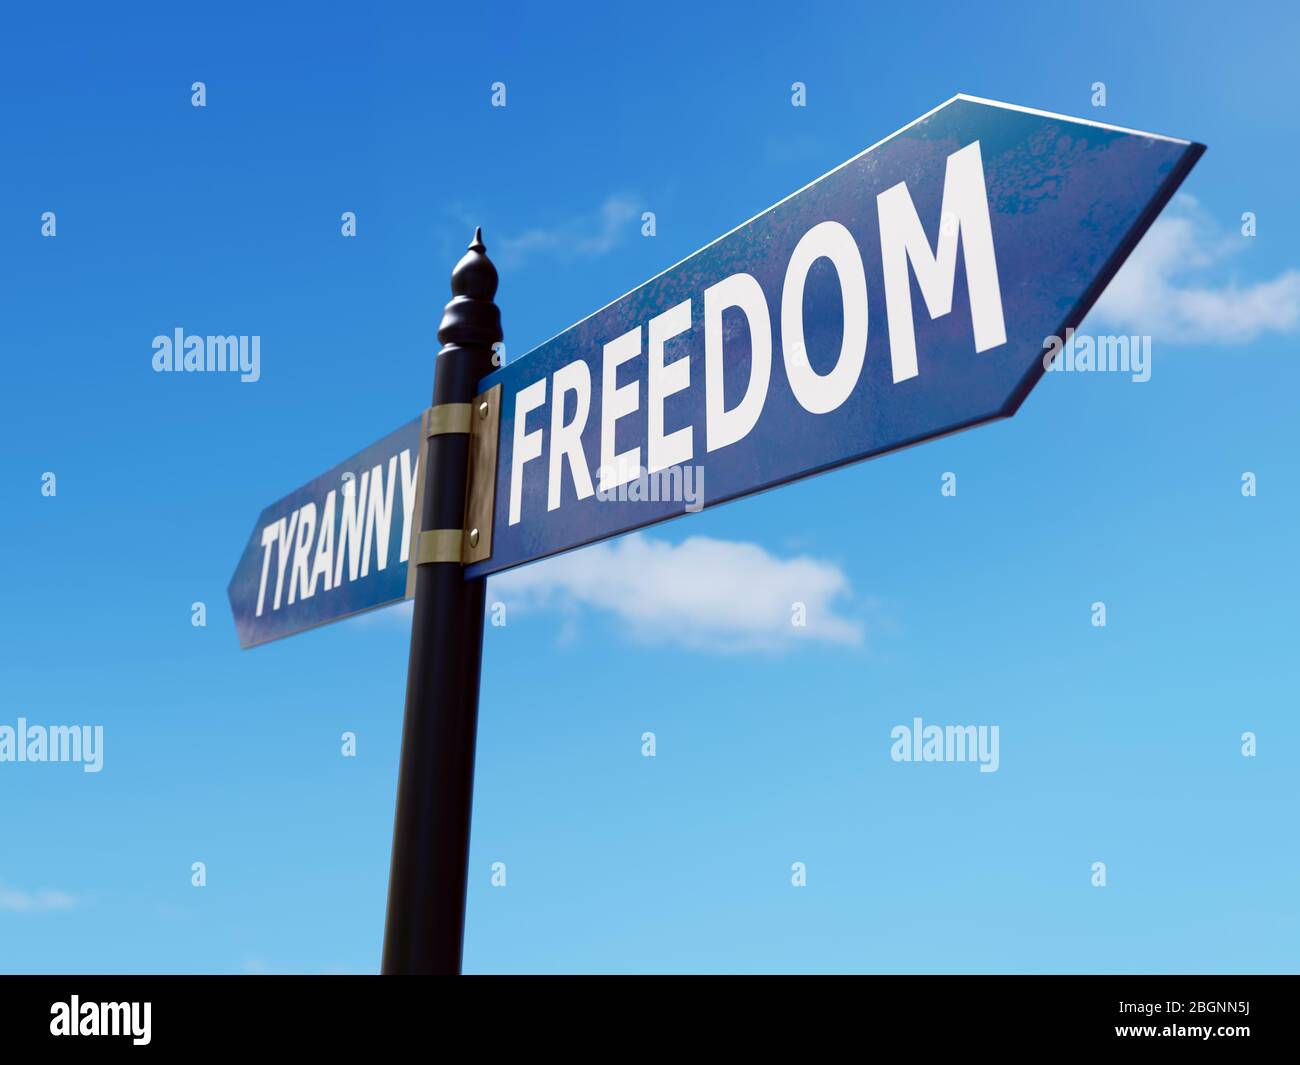 Two-directional metal signpost indicating Freedom and Tyranny directions over blue sky Stock Photo